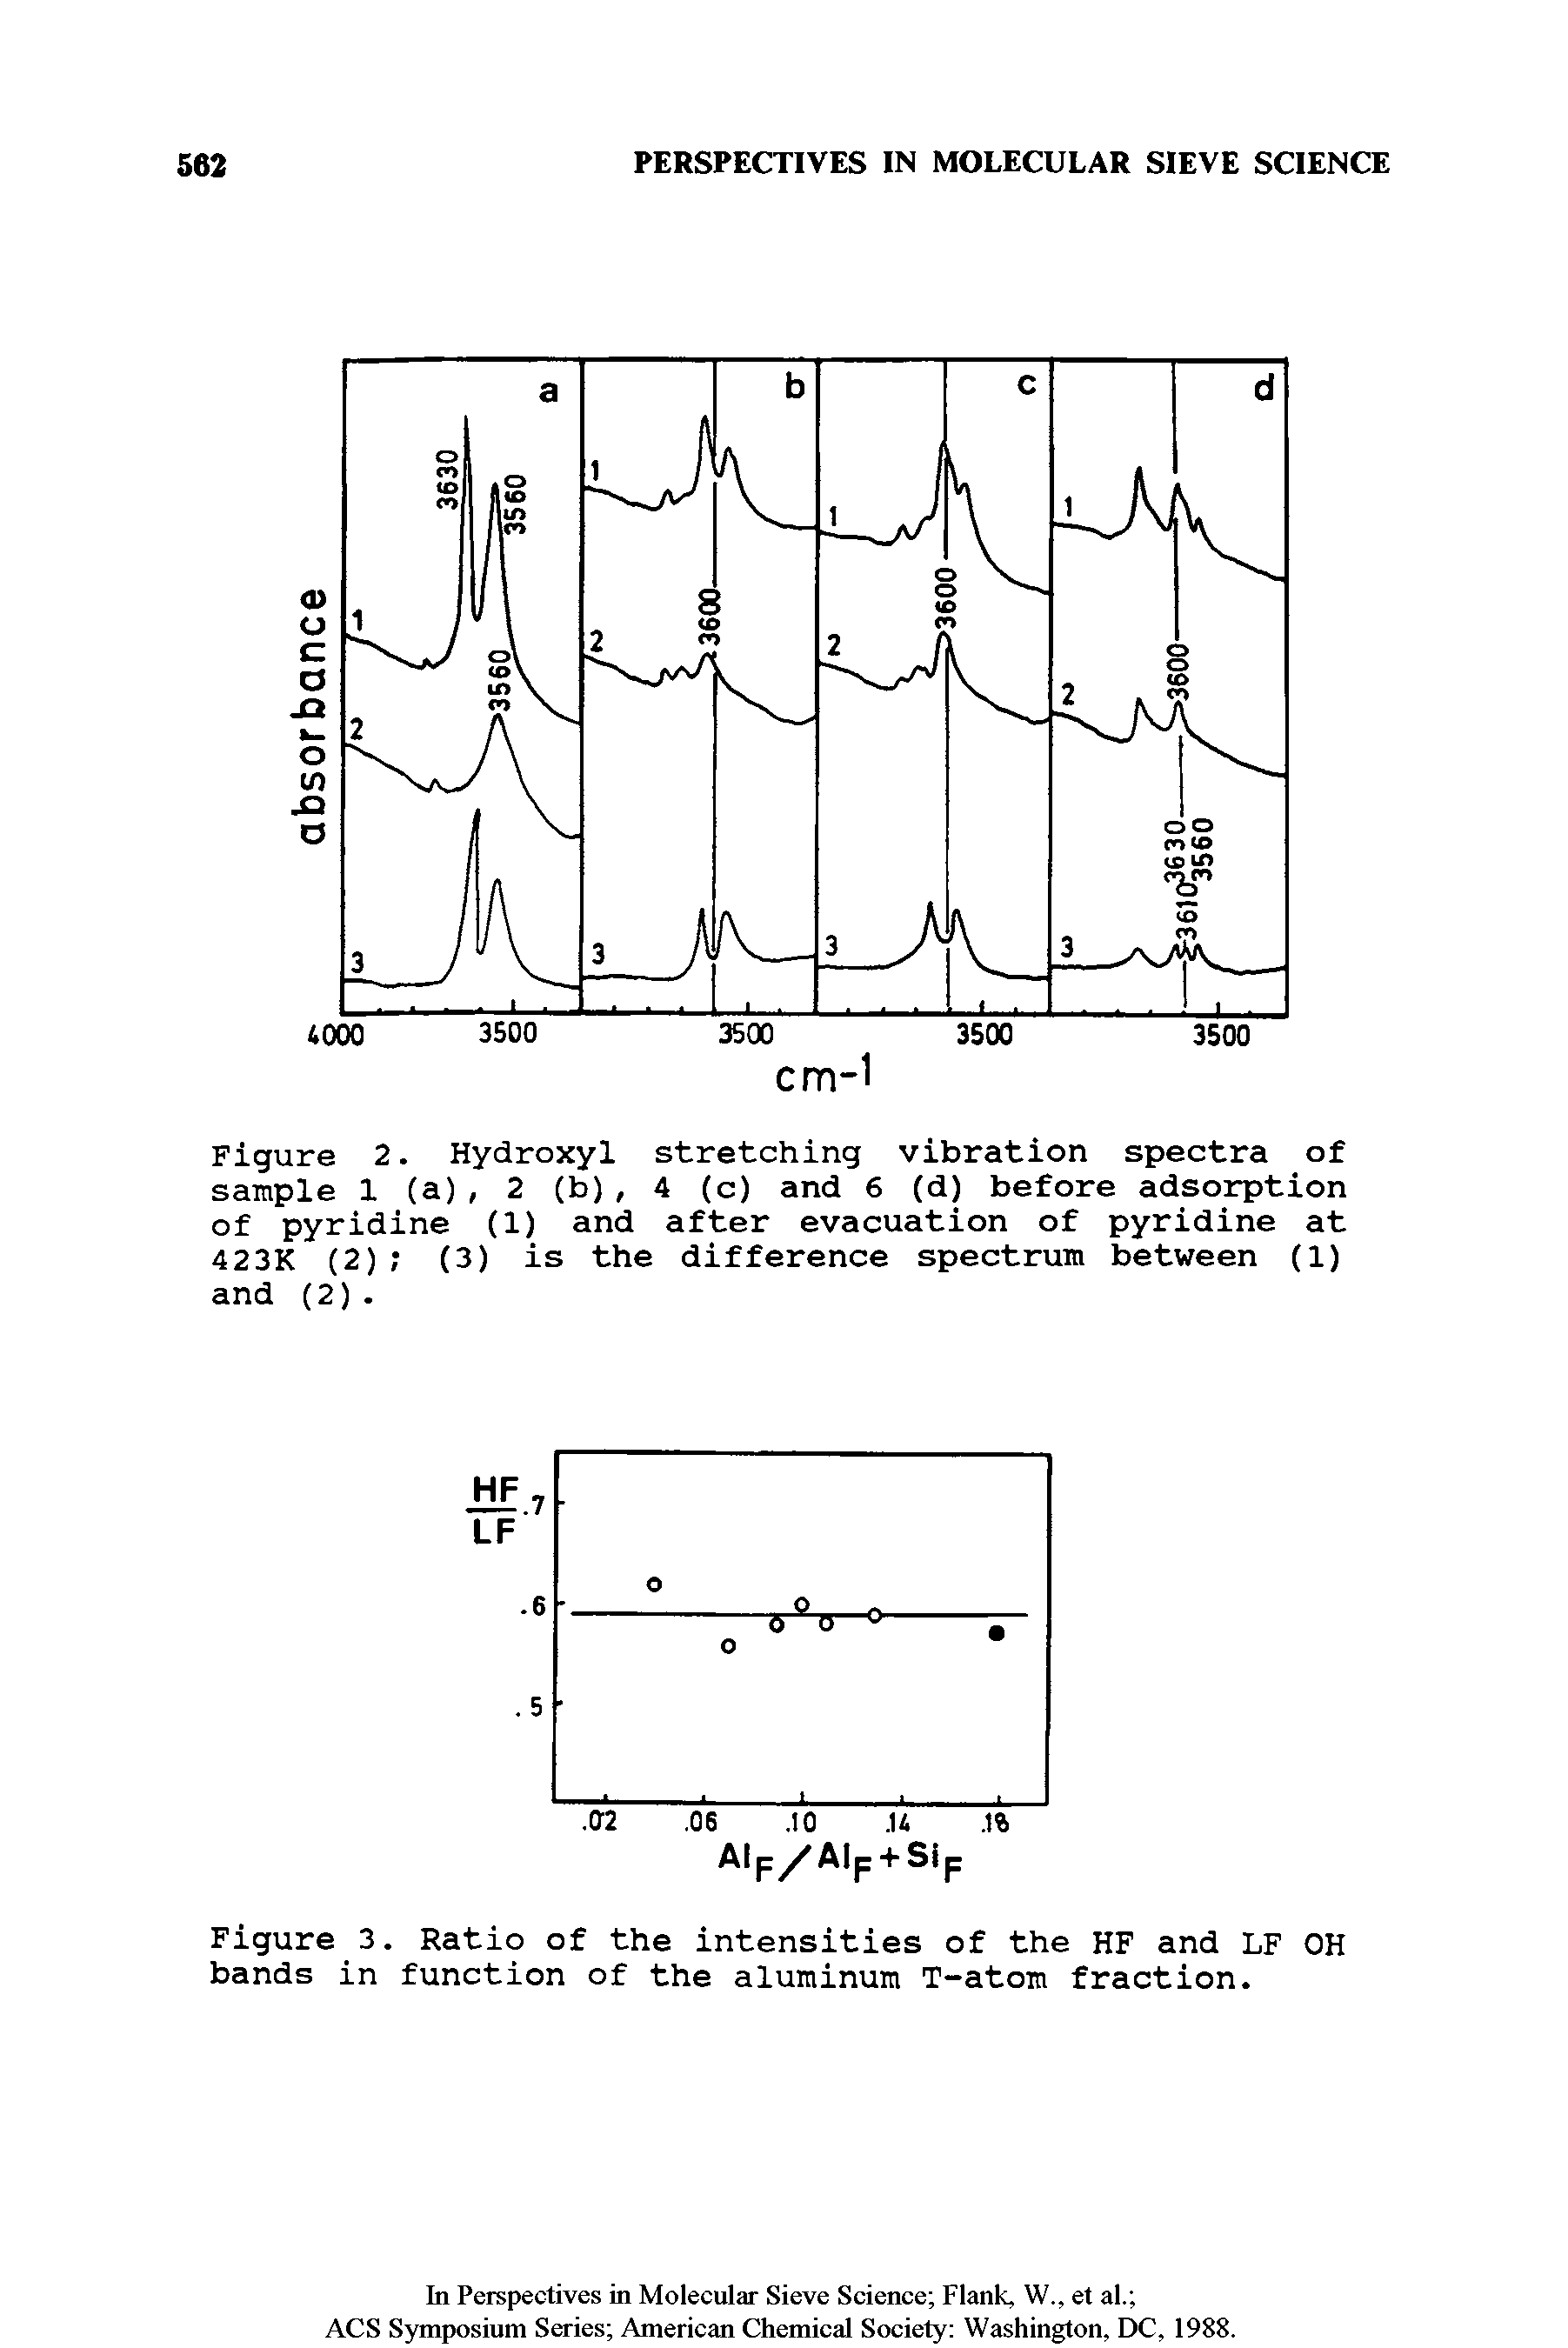 Figure 2. Hydroxyl stretching vibration spectra of sample 1 (a), 2 (b), 4 (c) and 6 (d) before adsorption of pyridine (1) and after evacuation of pyridine at 4 23K (2) (3) is the difference spectrum between (1)...